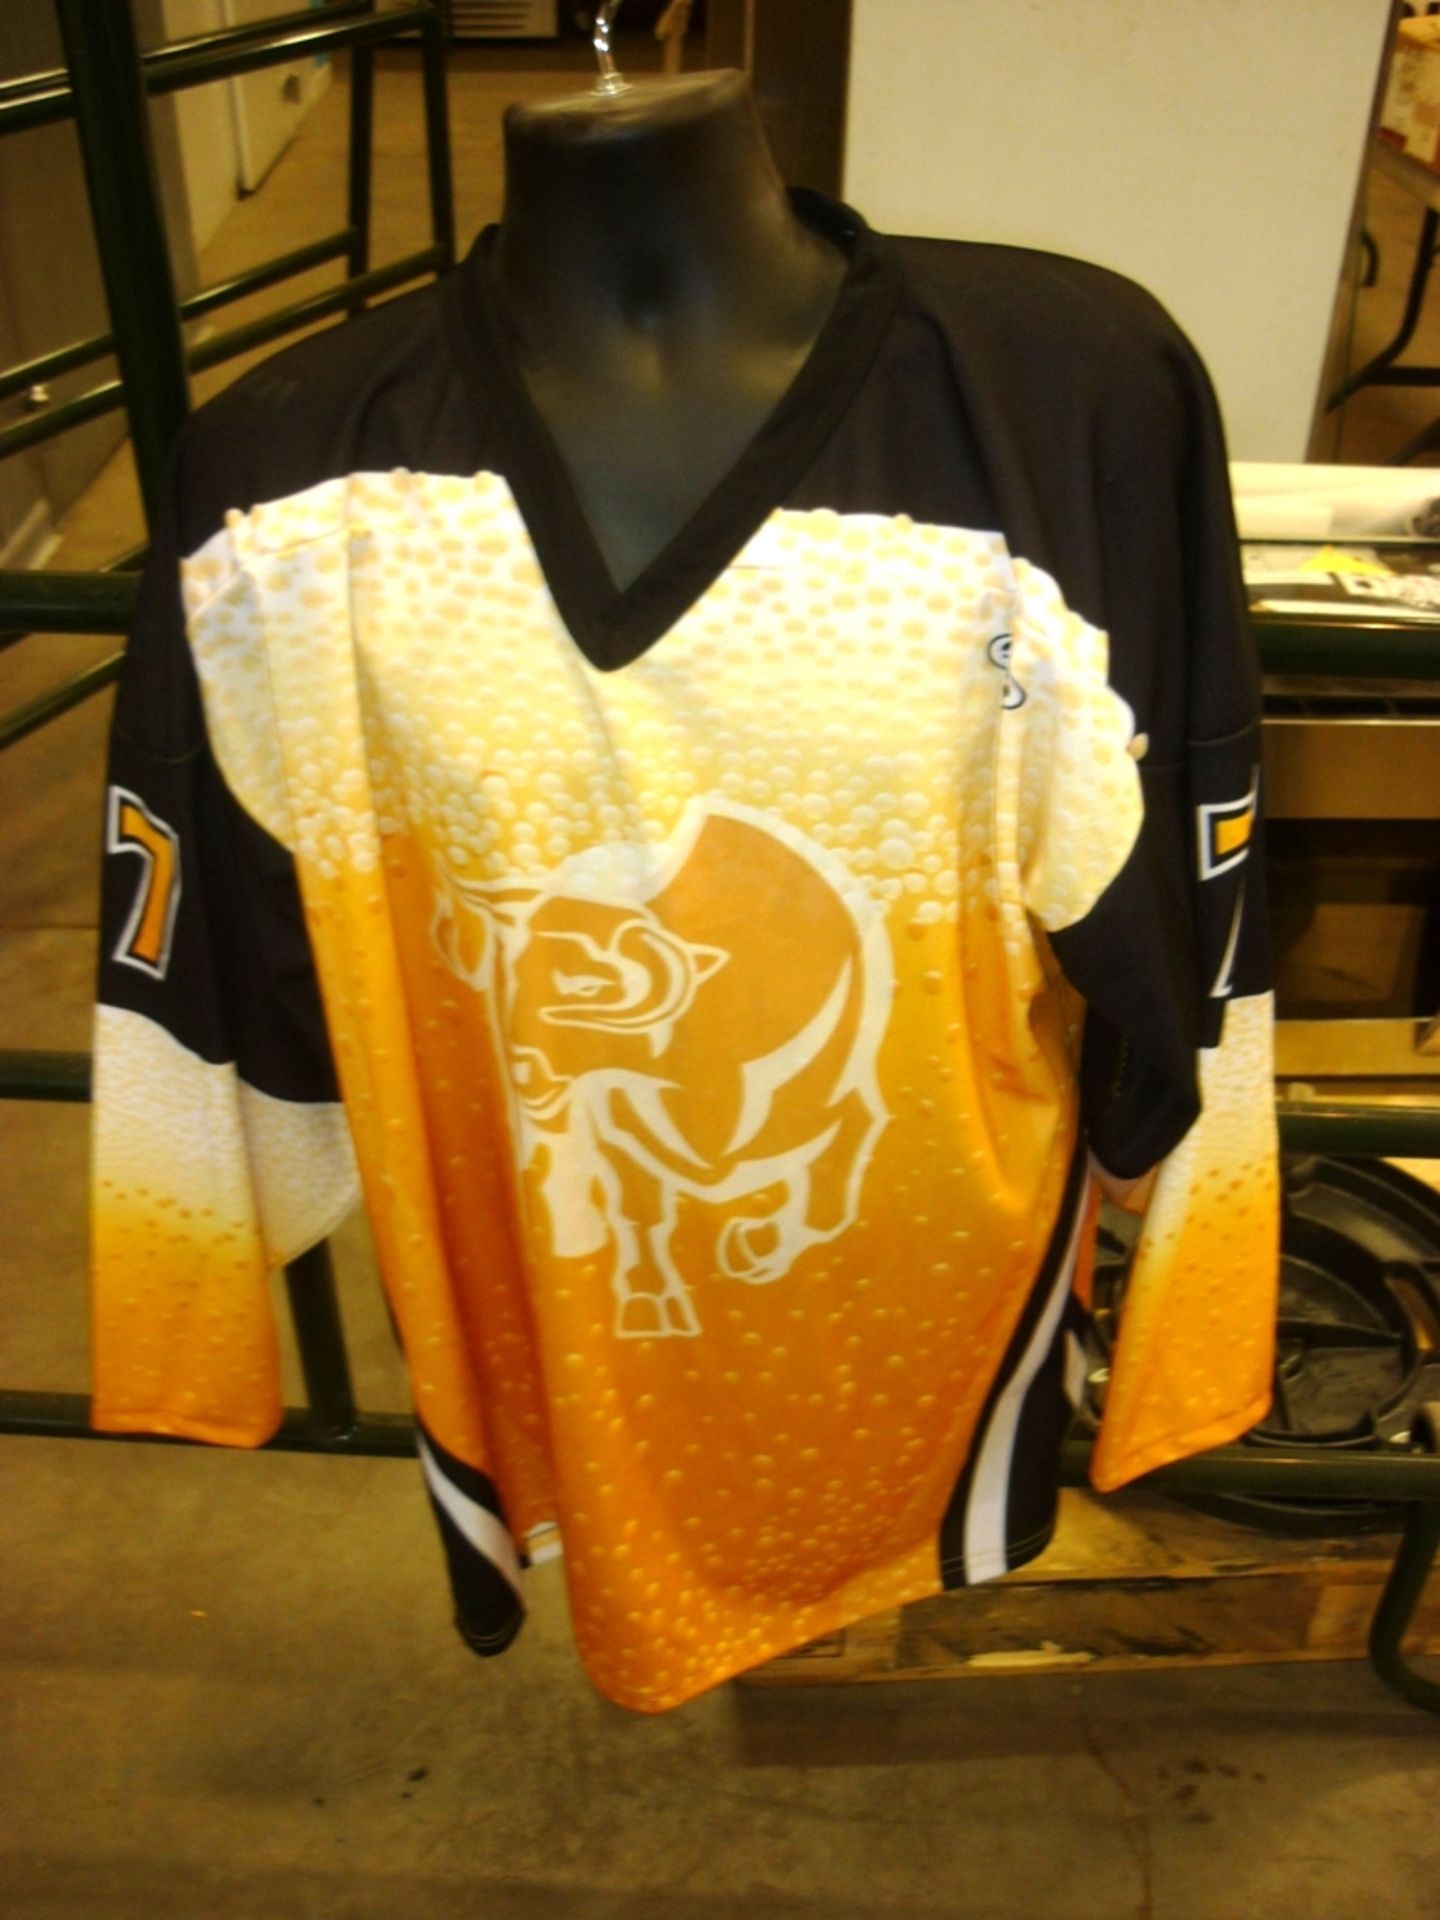 L/O BEER JERSEY & GOLF SHIRTS - Image 2 of 3